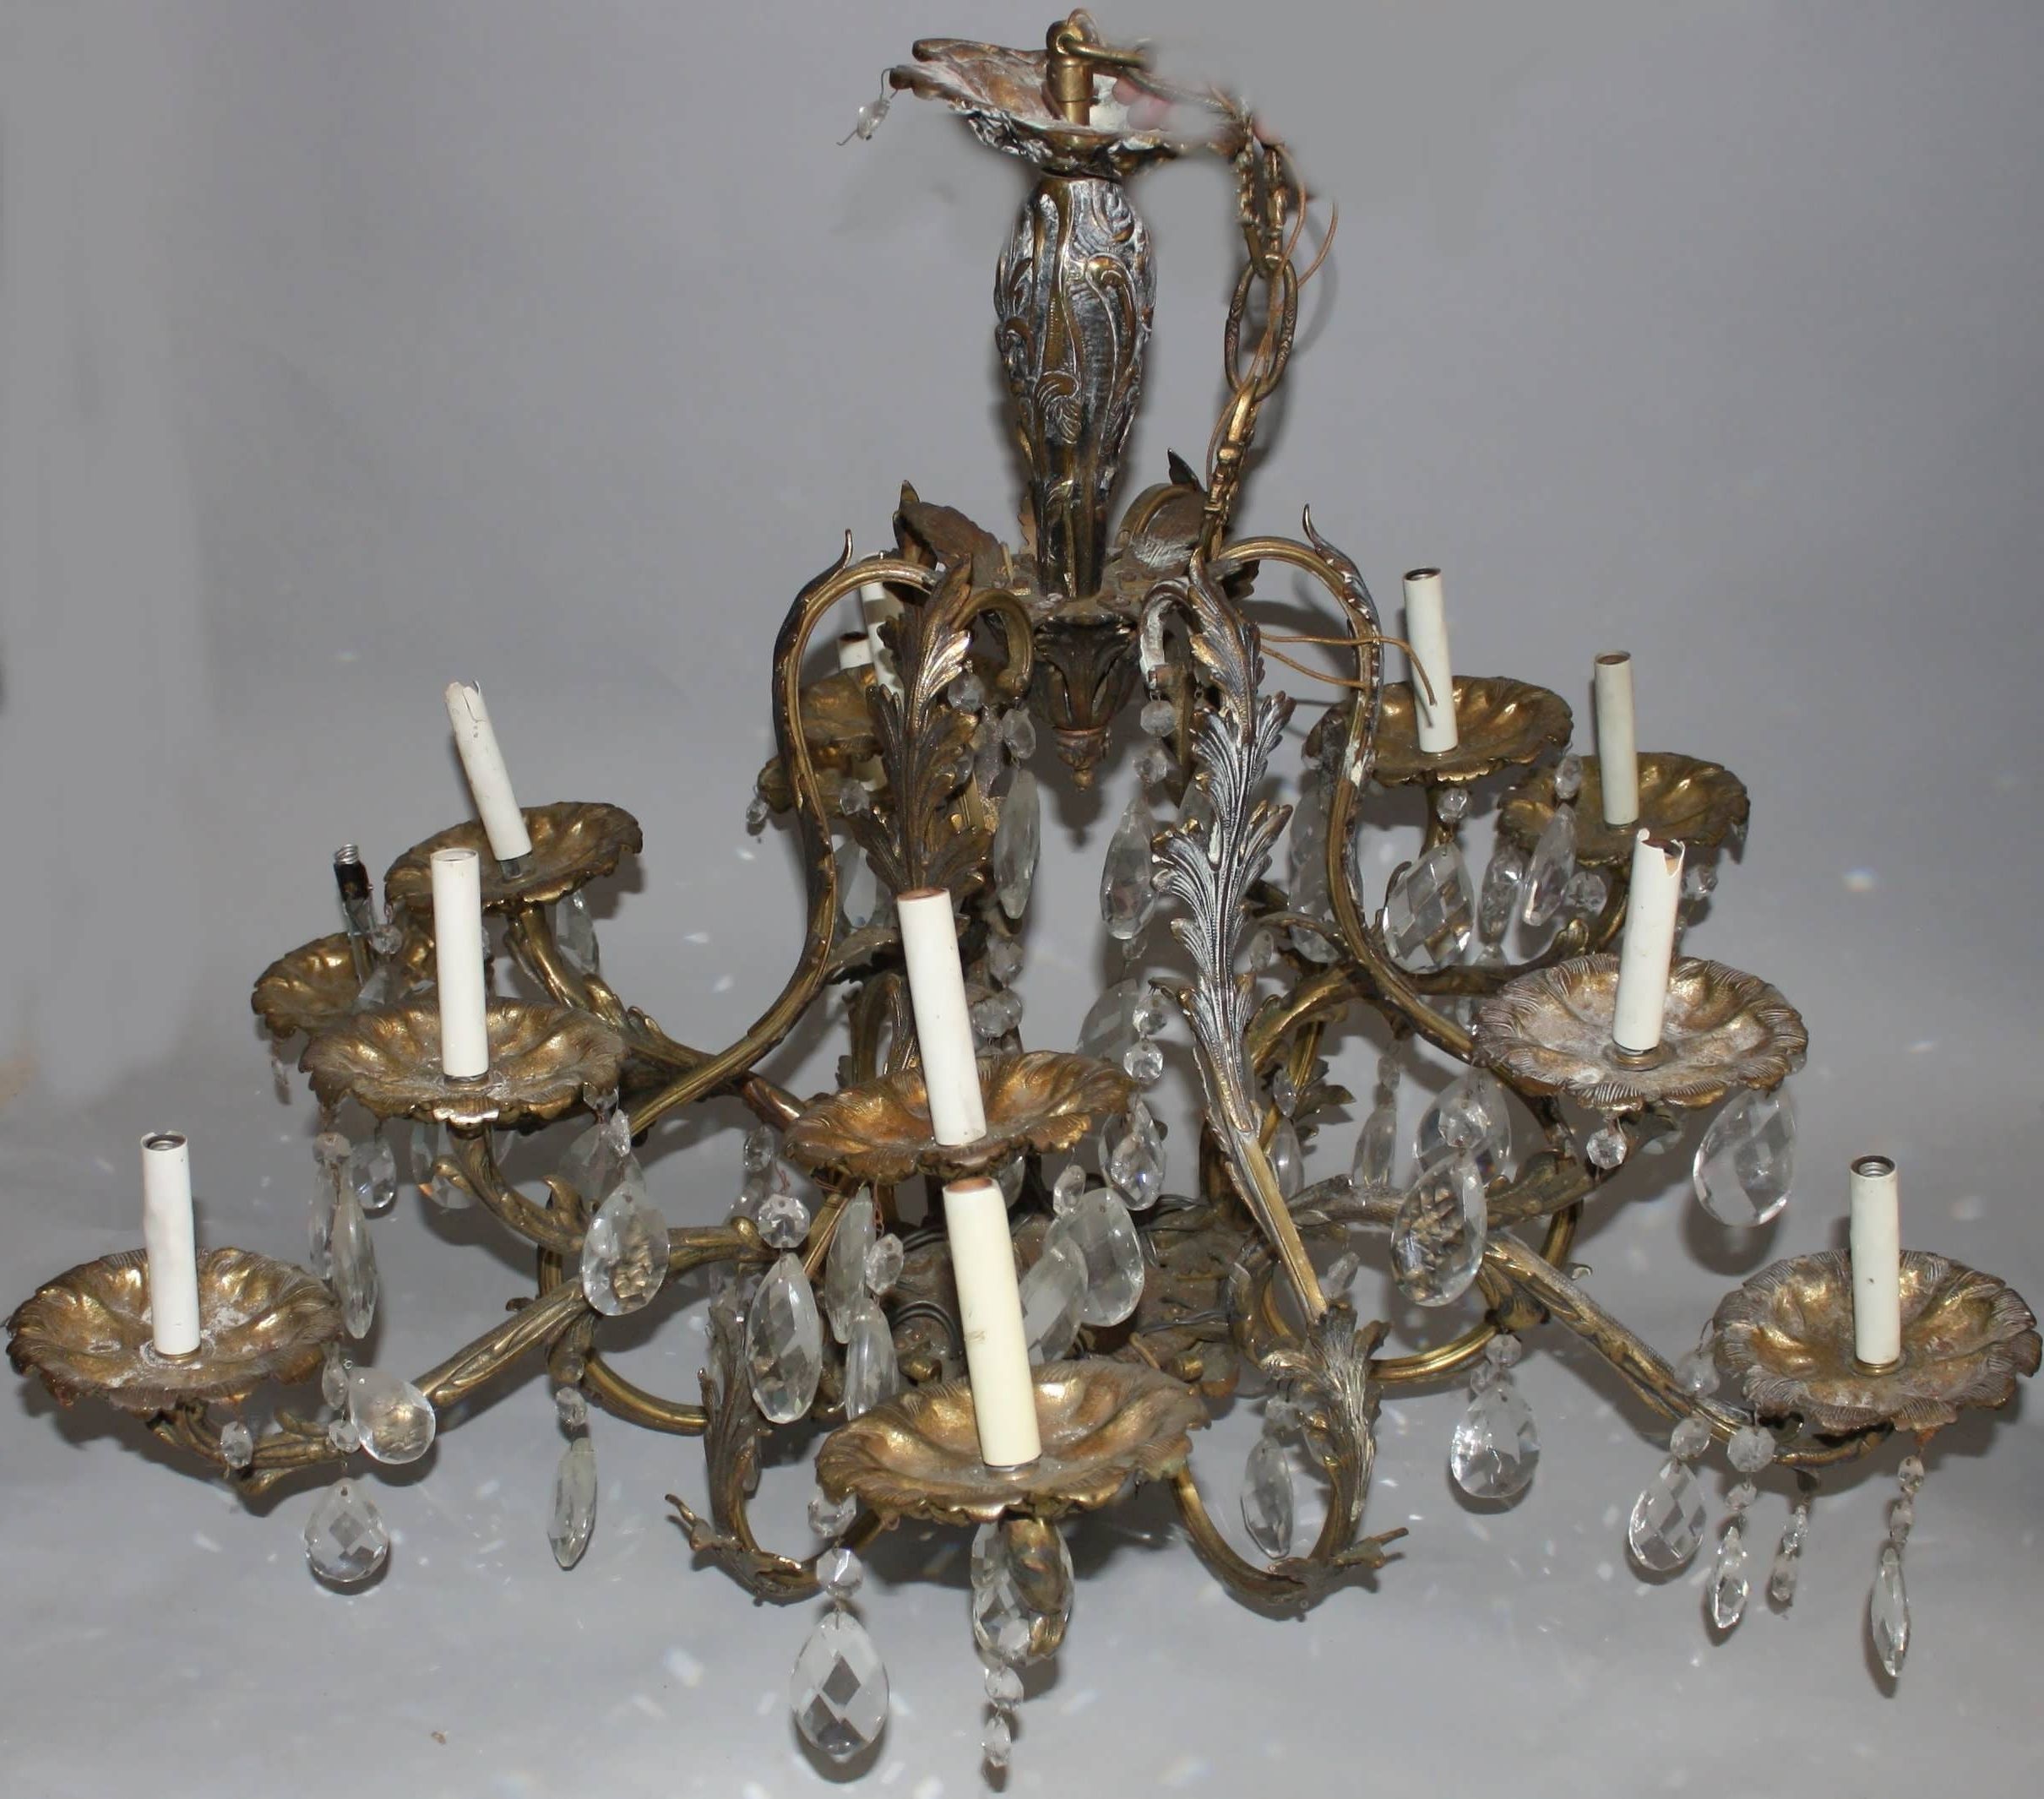 Old Brass Chandeliers Pertaining To Famous Chandeliers Design : Fabulous Vintage Brass Chandelier Plug In (View 5 of 20)